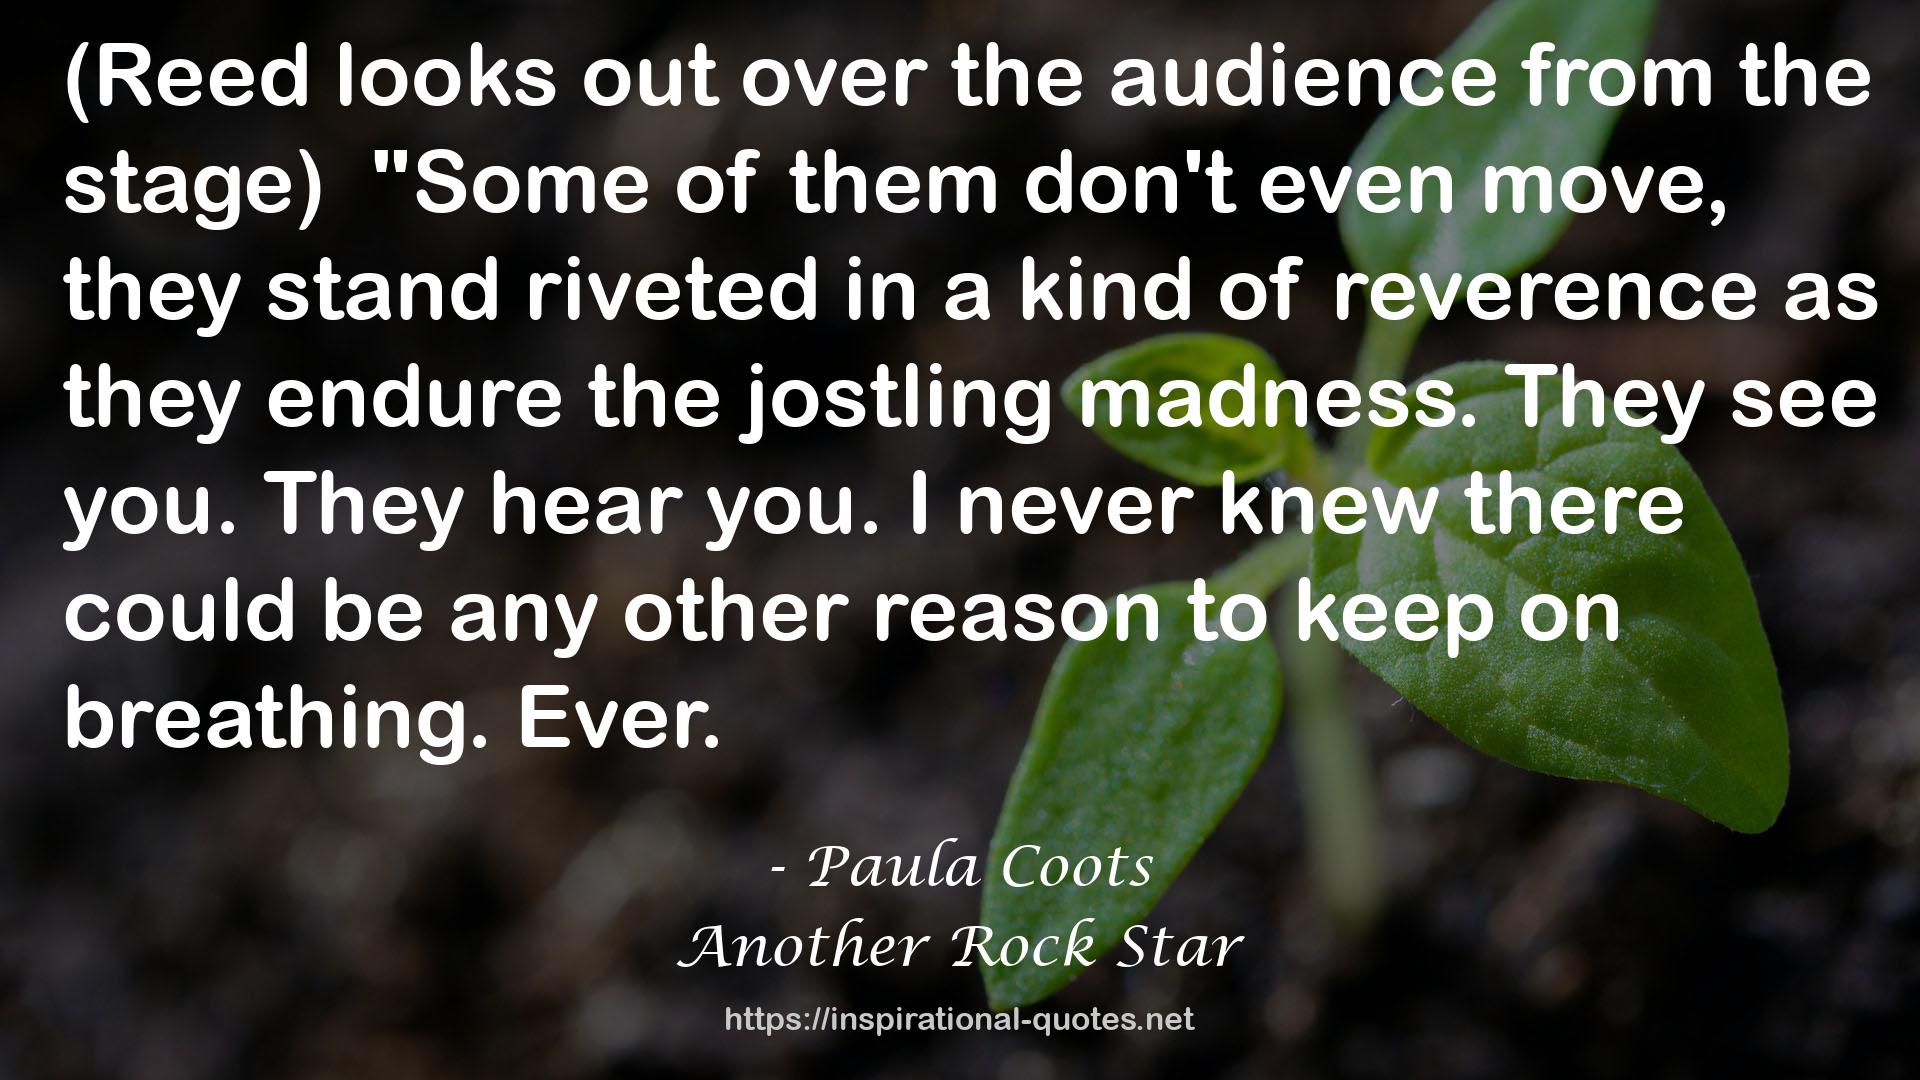 Paula Coots QUOTES